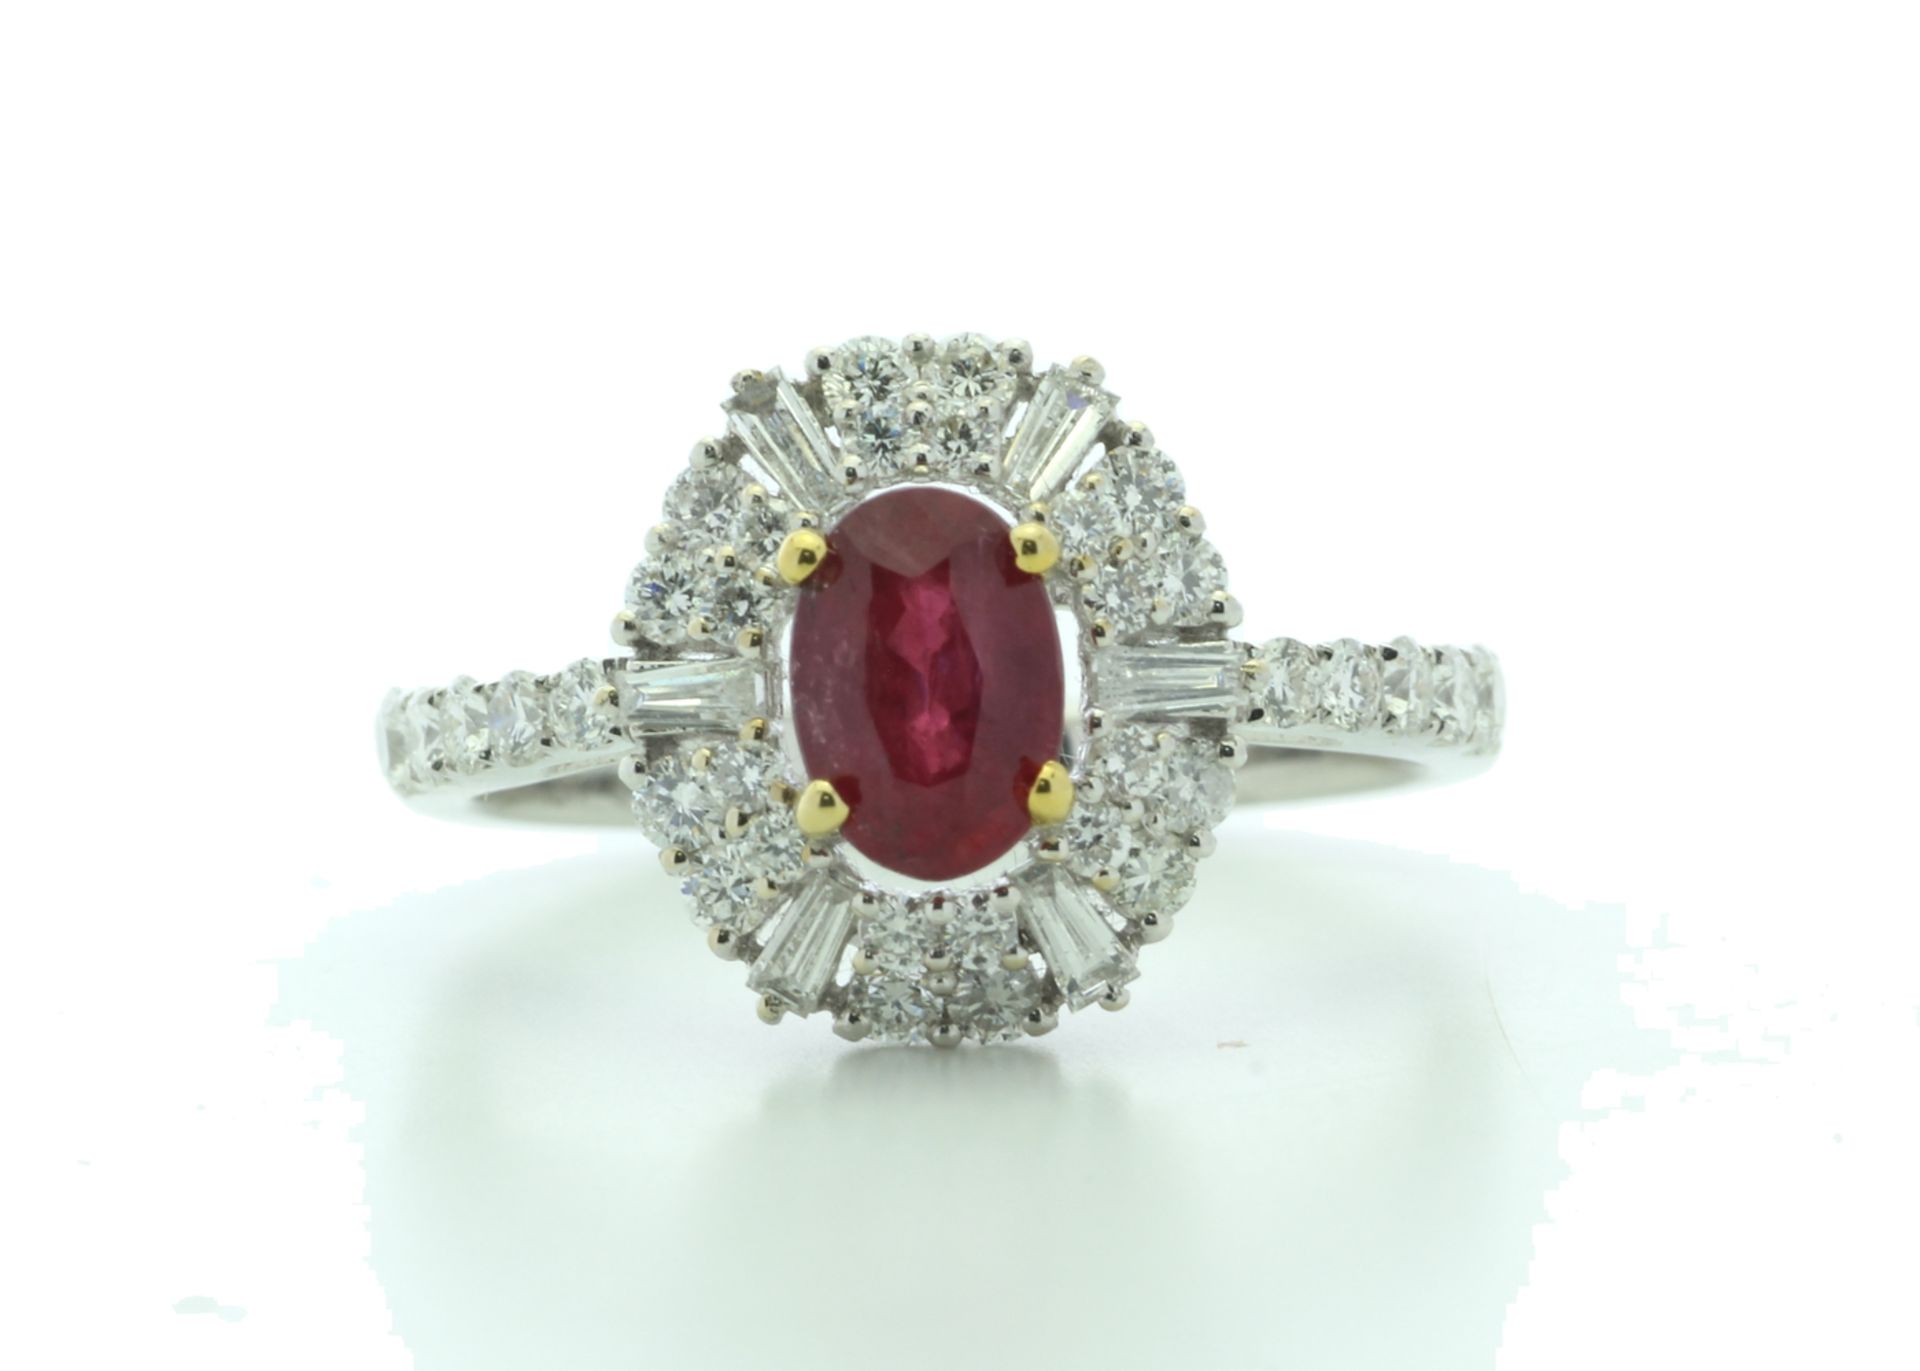 18ct White Gold Cluster Diamond And Ruby Ring (R0.86) 0.80 Carats - Valued By IDI £8,950.00 - A